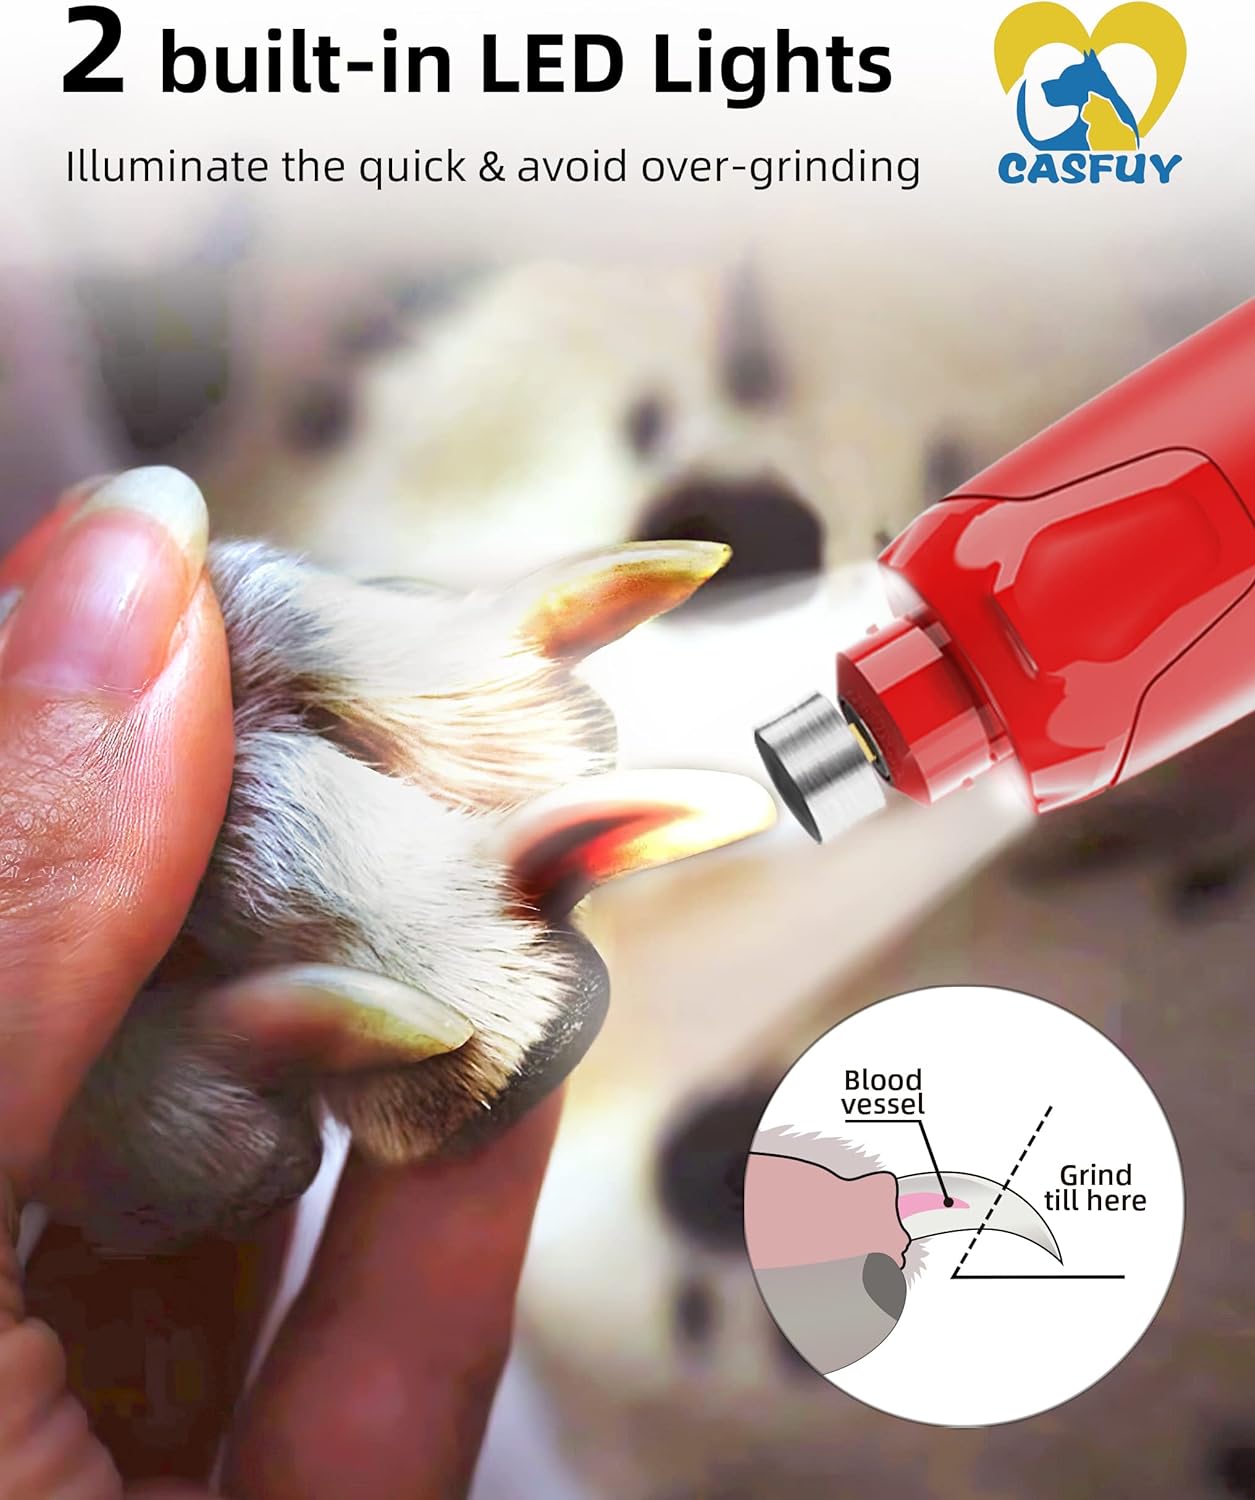 Casfuy Dog Nail Grinder Quiet - (45db) 6-Speed Pet Nail Grinder with 2 LED Lights for Large Medium Small Dogs/Cats, Professional 3 Ports Rechargeable Electric Dog Nail Trimmer with Dust Cap